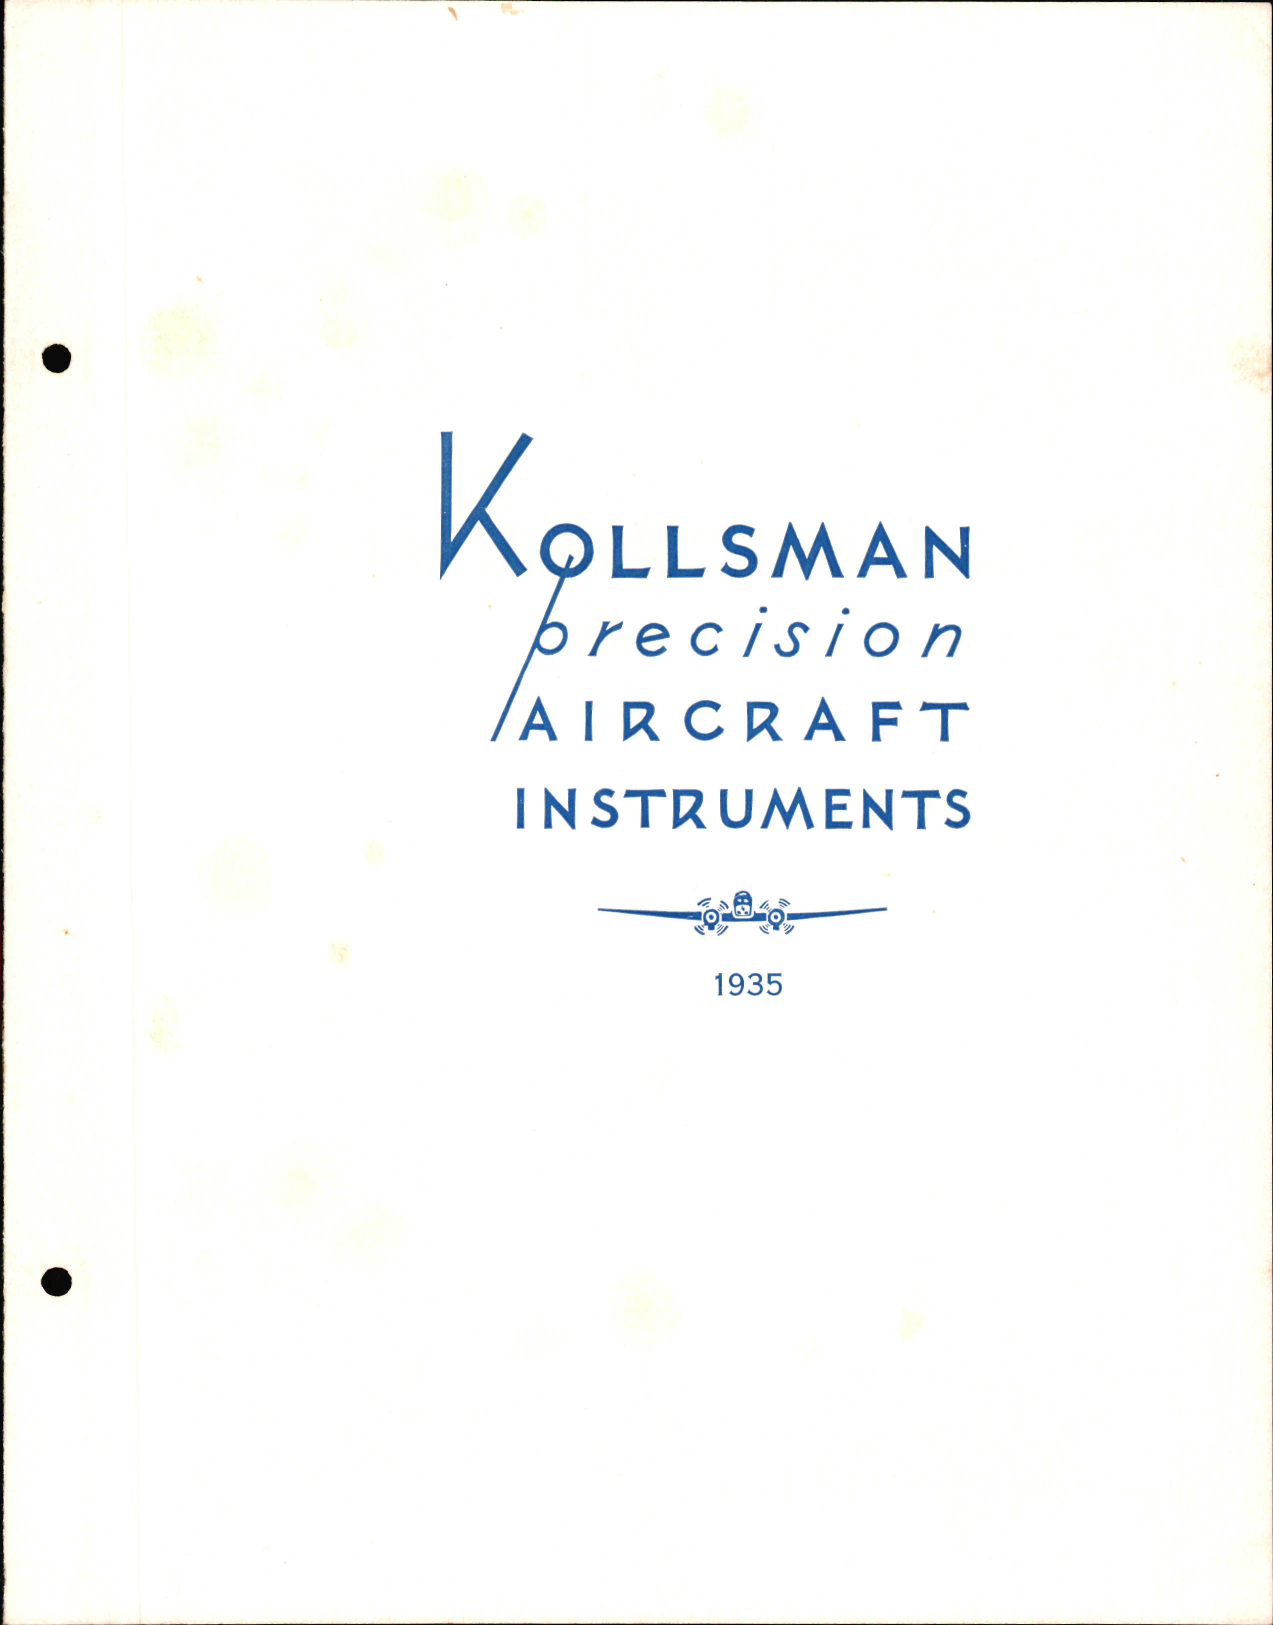 Sample page 1 from AirCorps Library document: Kollsman Precision Aircraft Instruments 